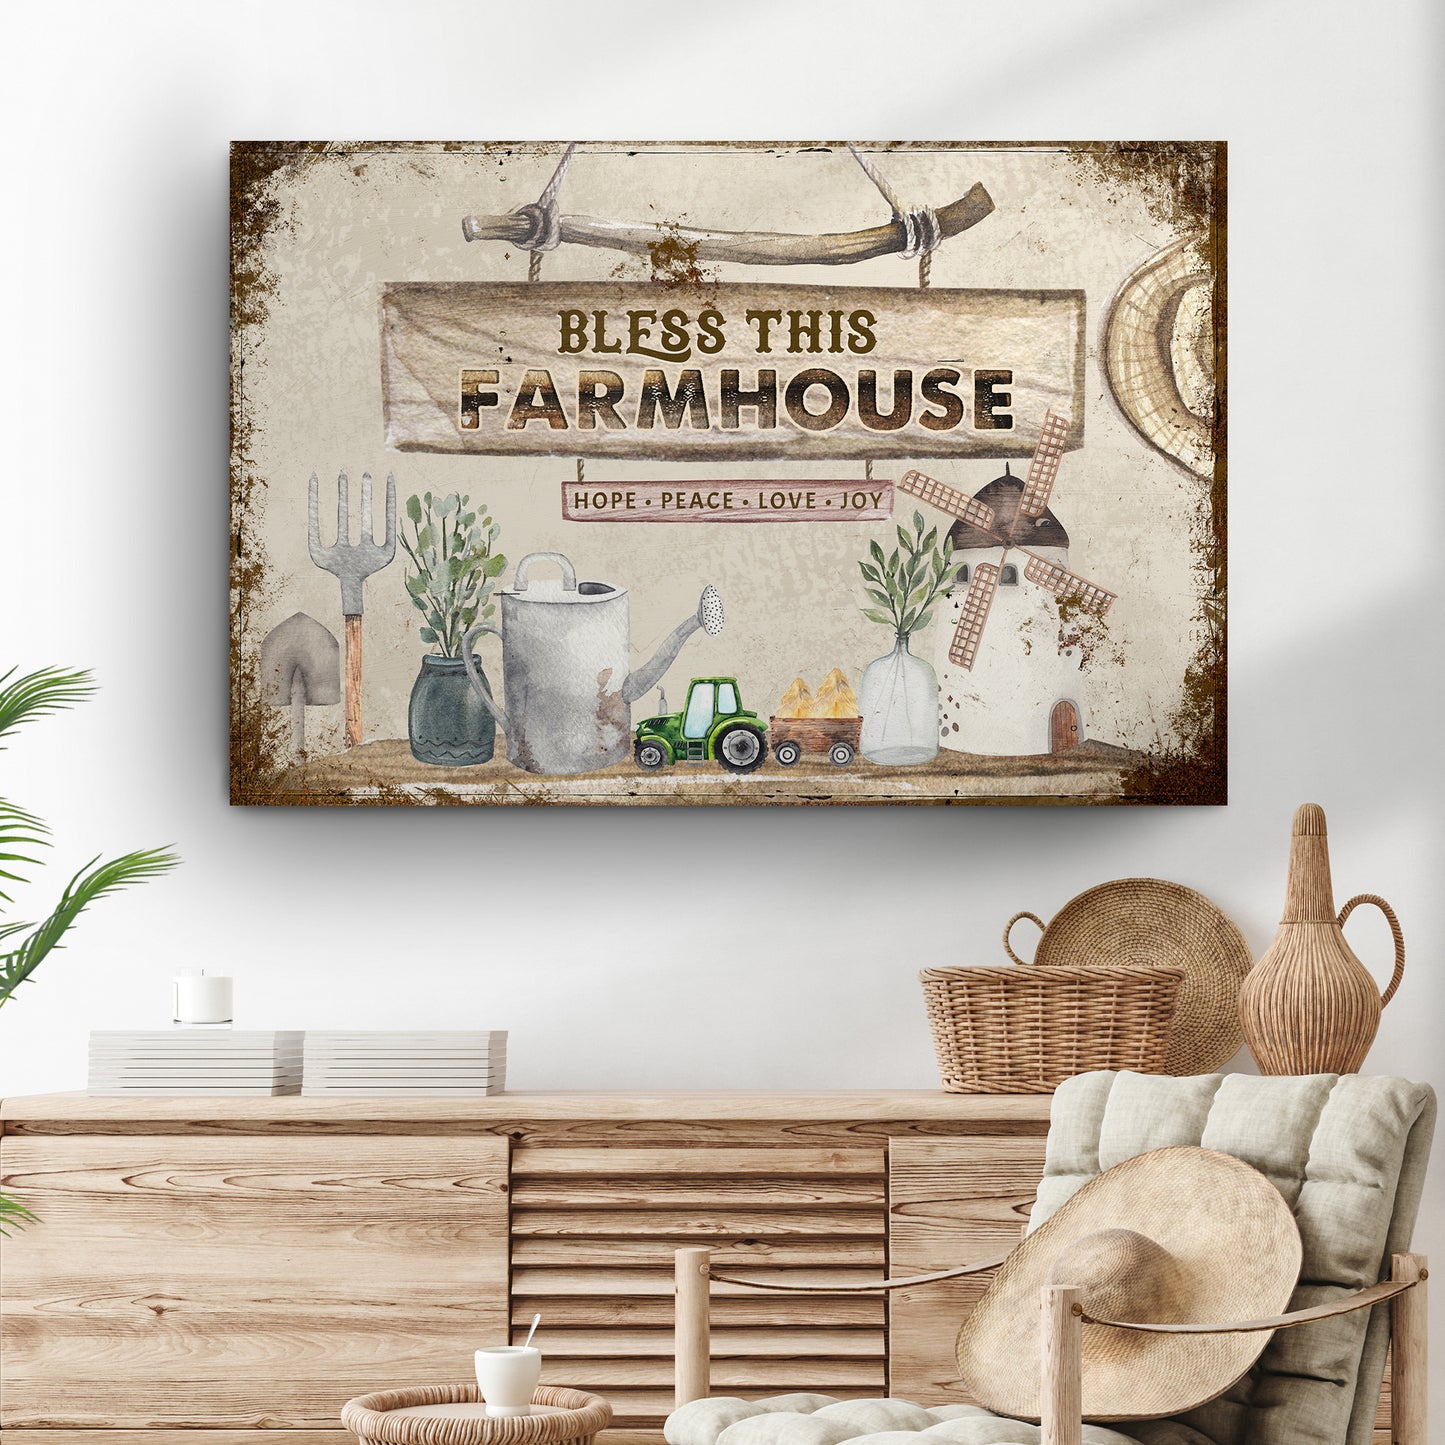 Bless This Farmhouse Sign - Image by Tailored Canvases